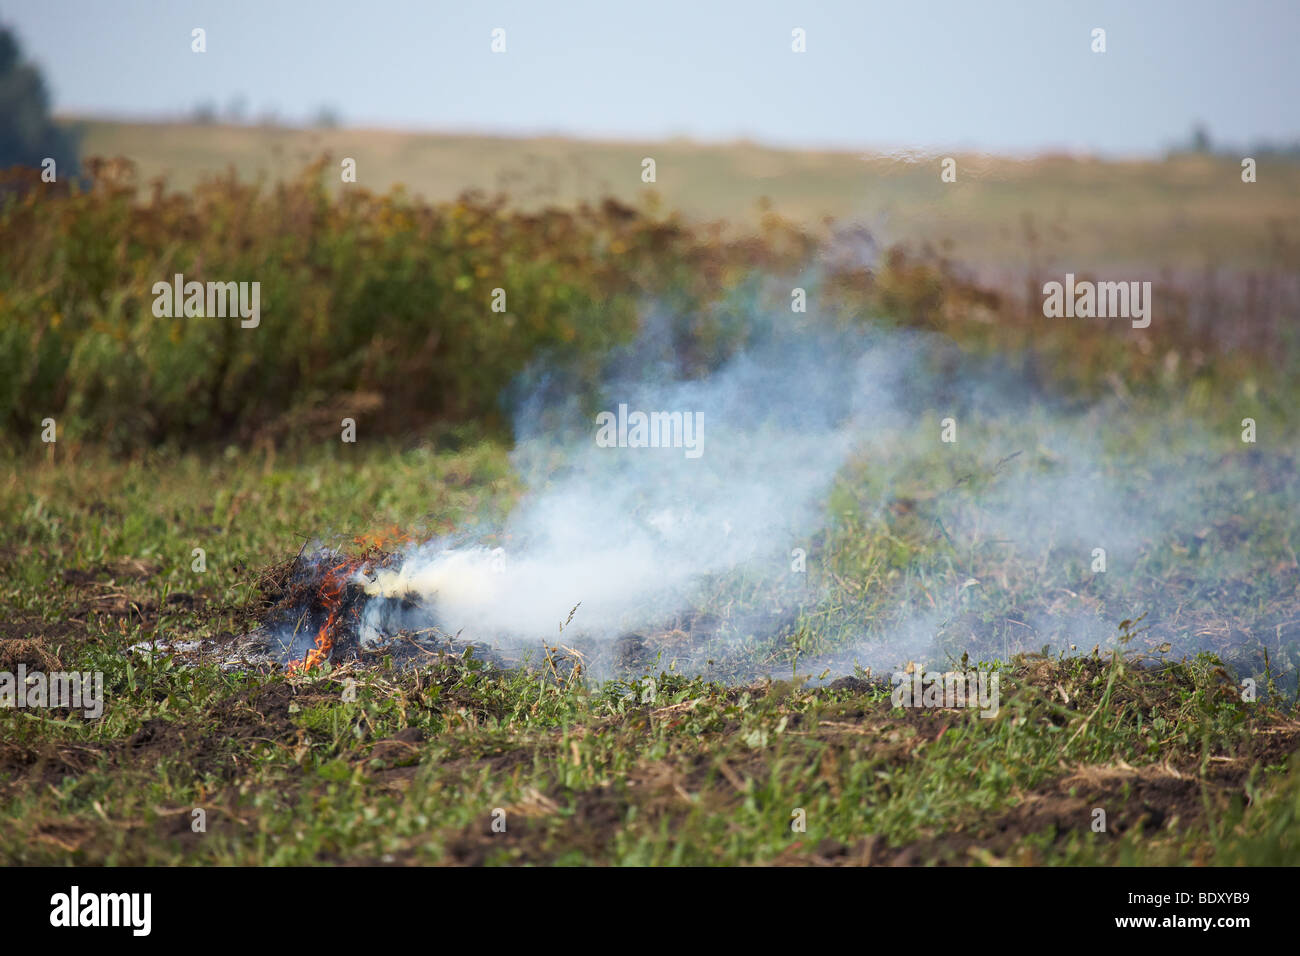 Fire and smoke in agrarian field Stock Photo